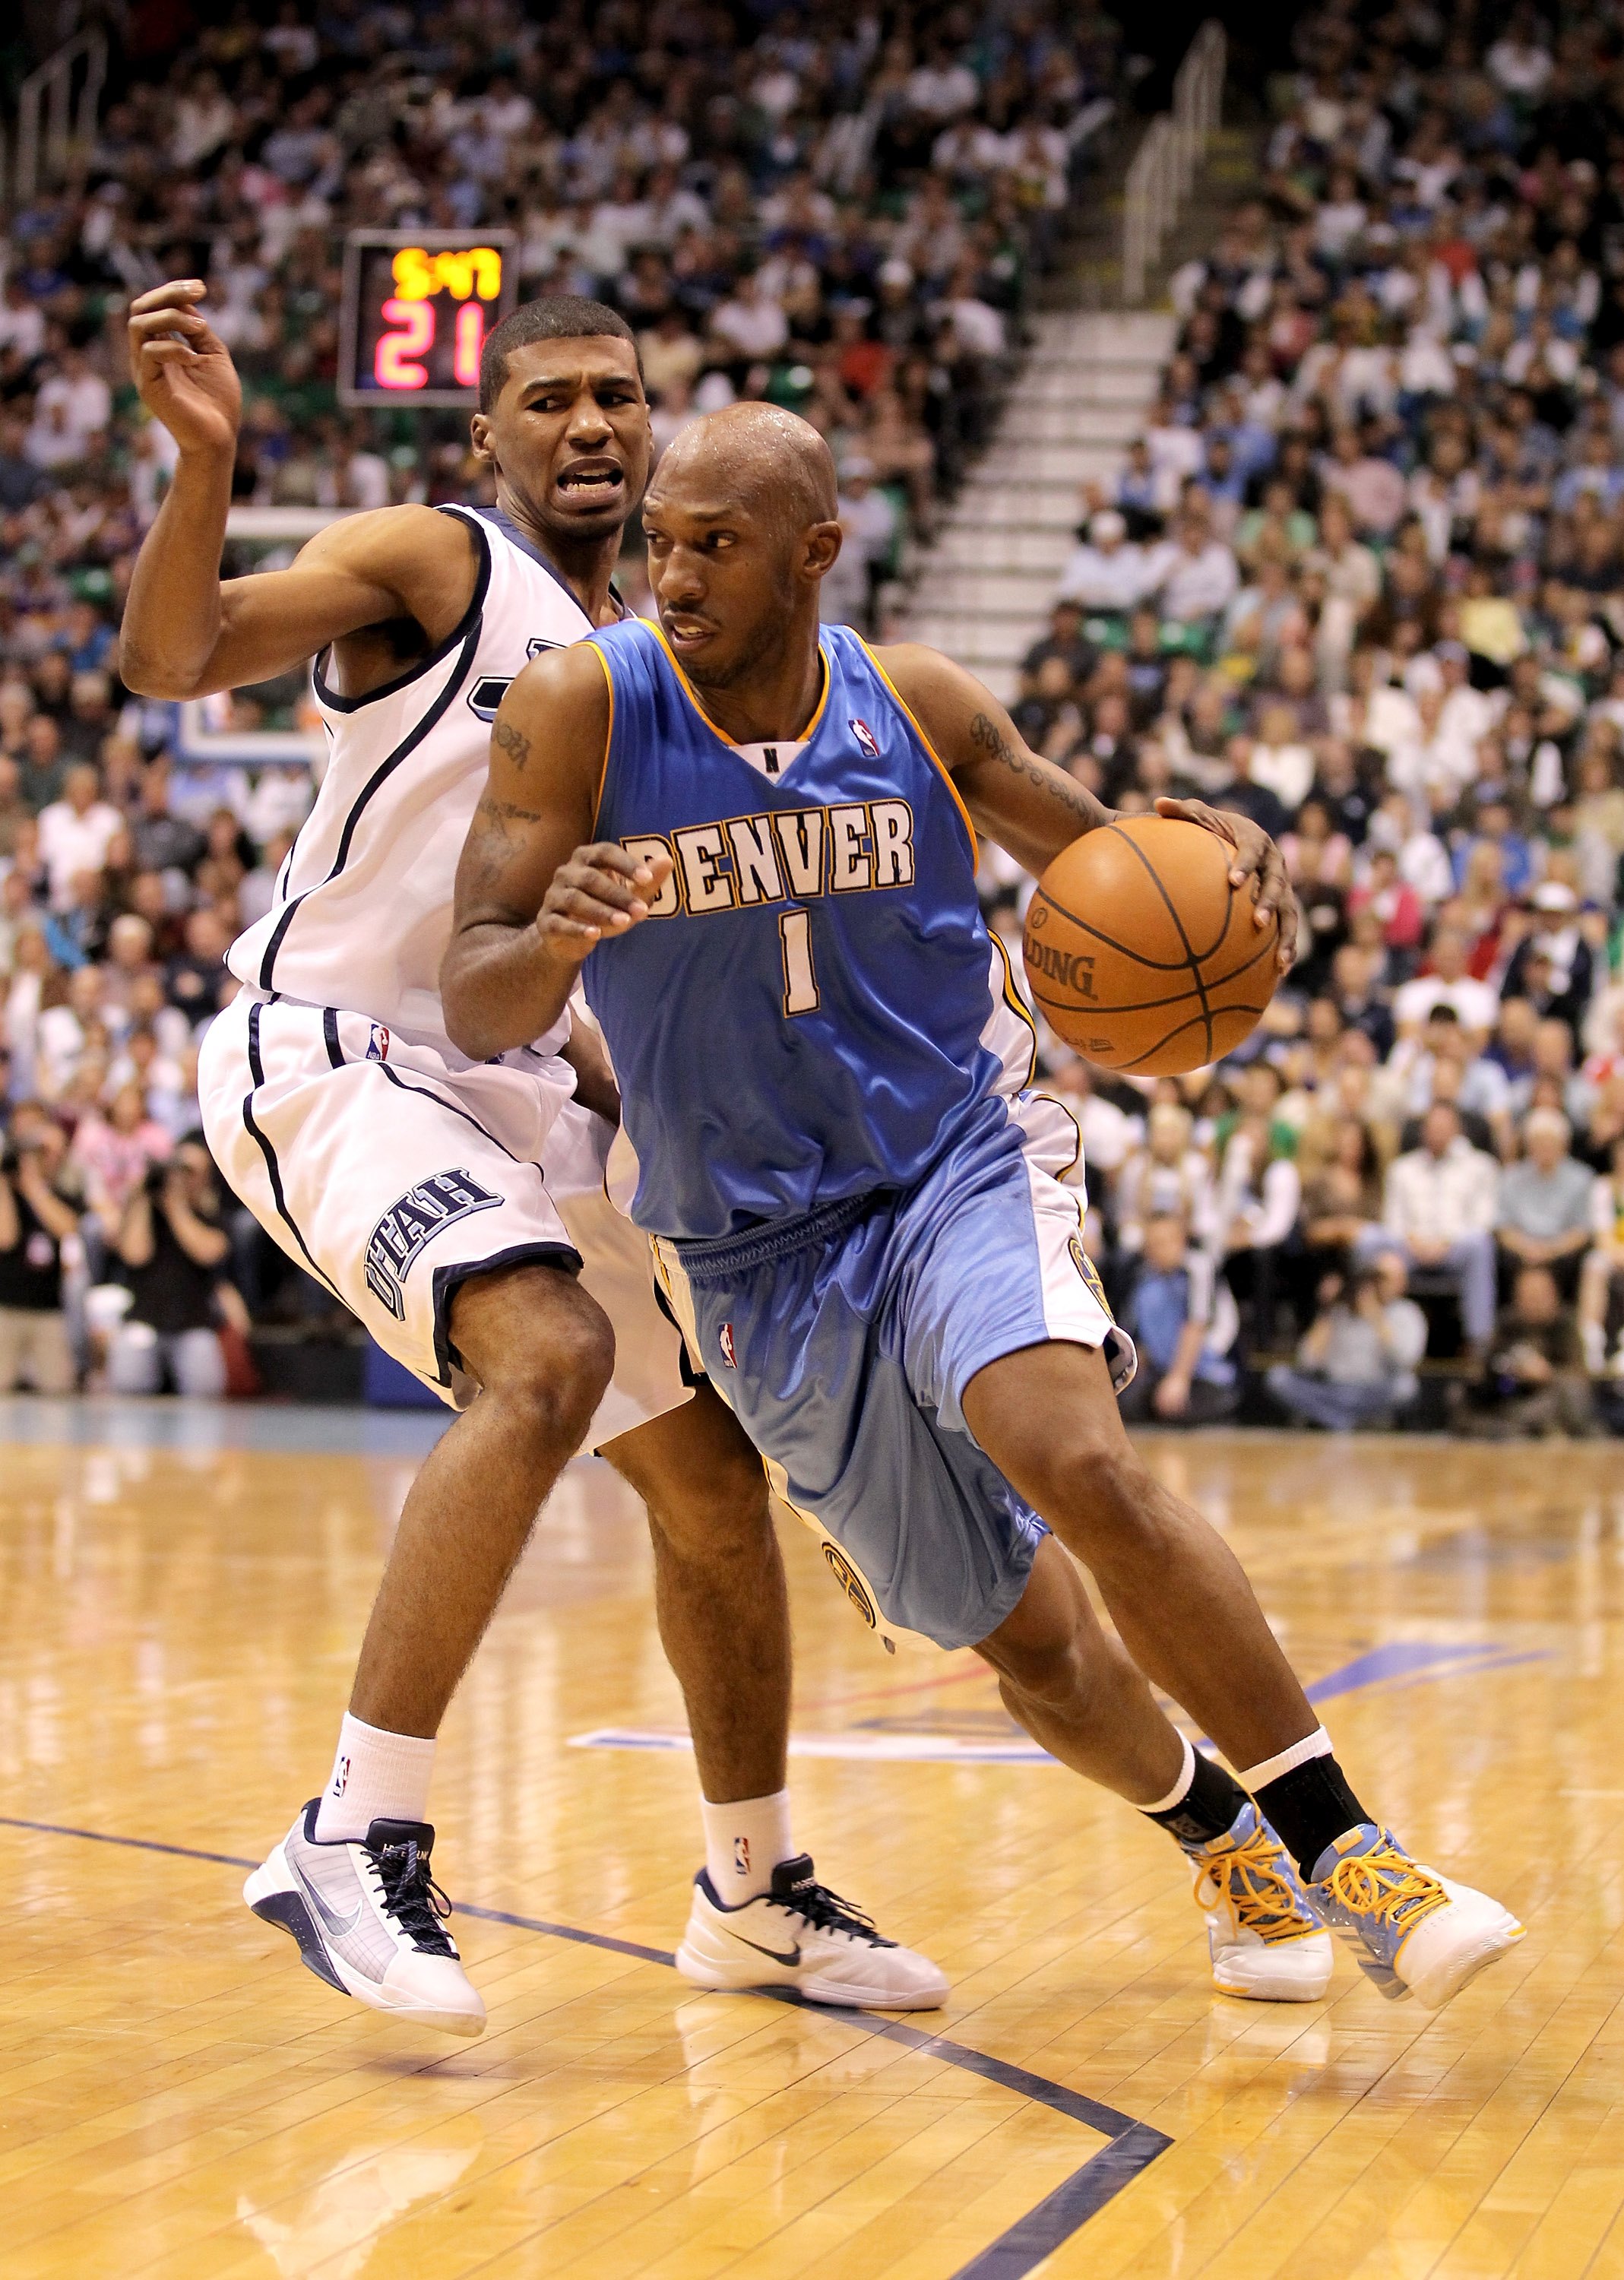 SALT LAKE CITY - APRIL 30:  Chauncey Billups #1 of the Denver Nuggets drives to the basket during their game against the Utah Jazz in Game Six of the Western Conference Quarterfinals of the 2010 NBA Playoffs at EnergySolutions Arena on April 30, 2010 in S